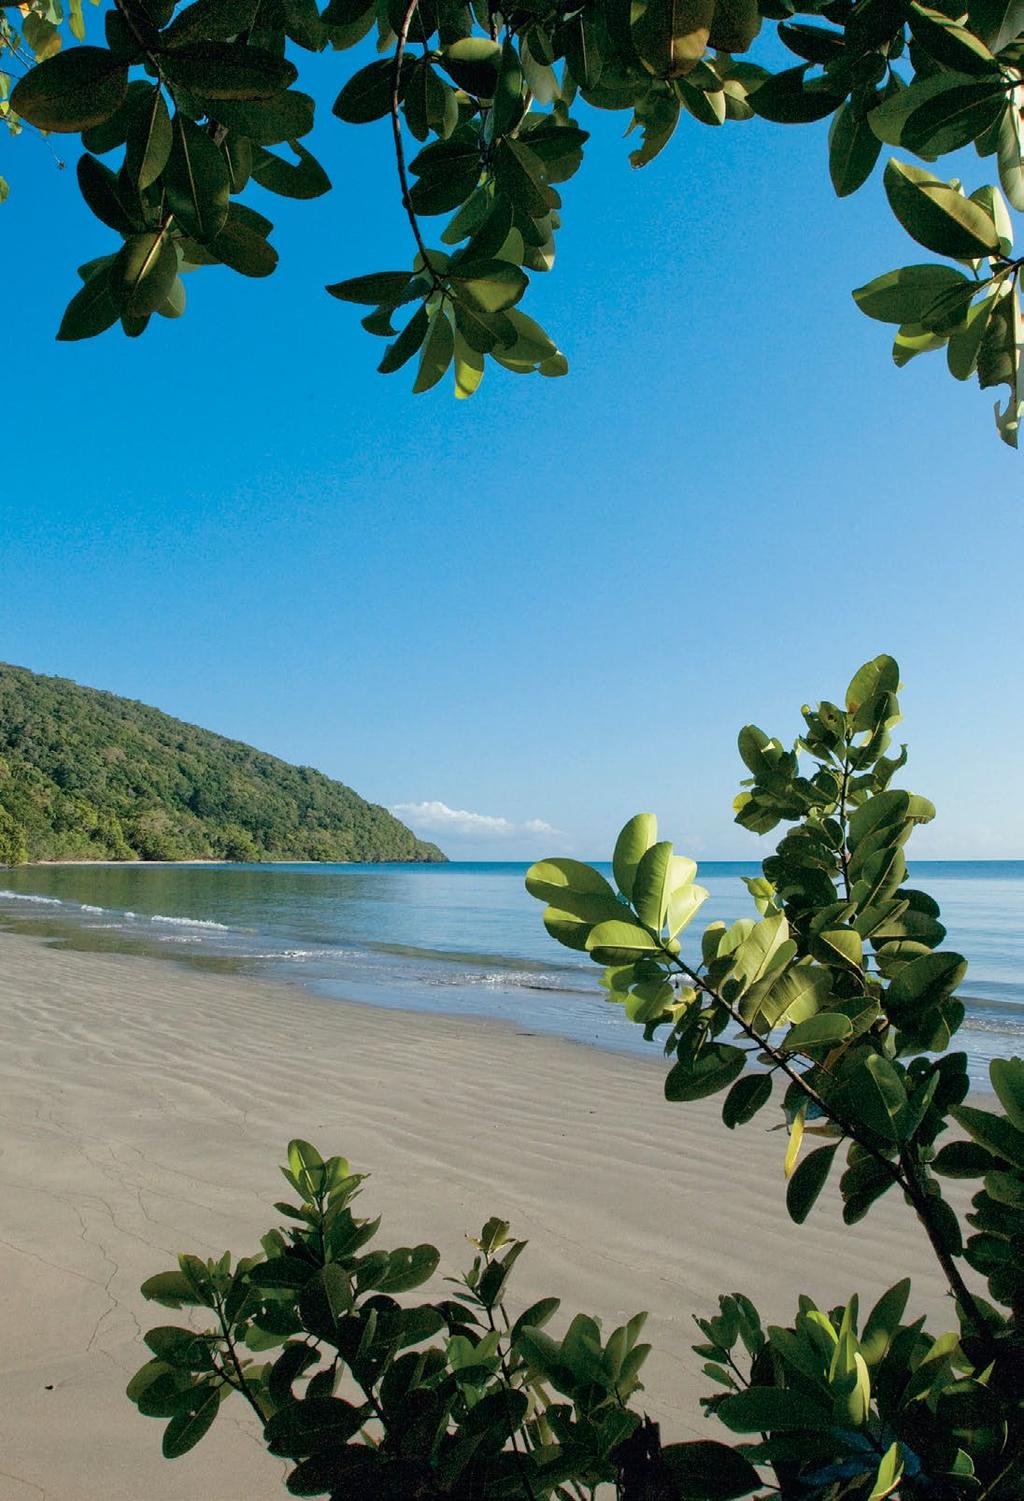 CAPE TRIBULATION YHA BUDGET GROUP ACCOMMODATION - 2018 Nestled deep within the Daintree Rainforest, Cape Tribulation YHA provides budget group accommodation at one of Australia s most famous beaches.